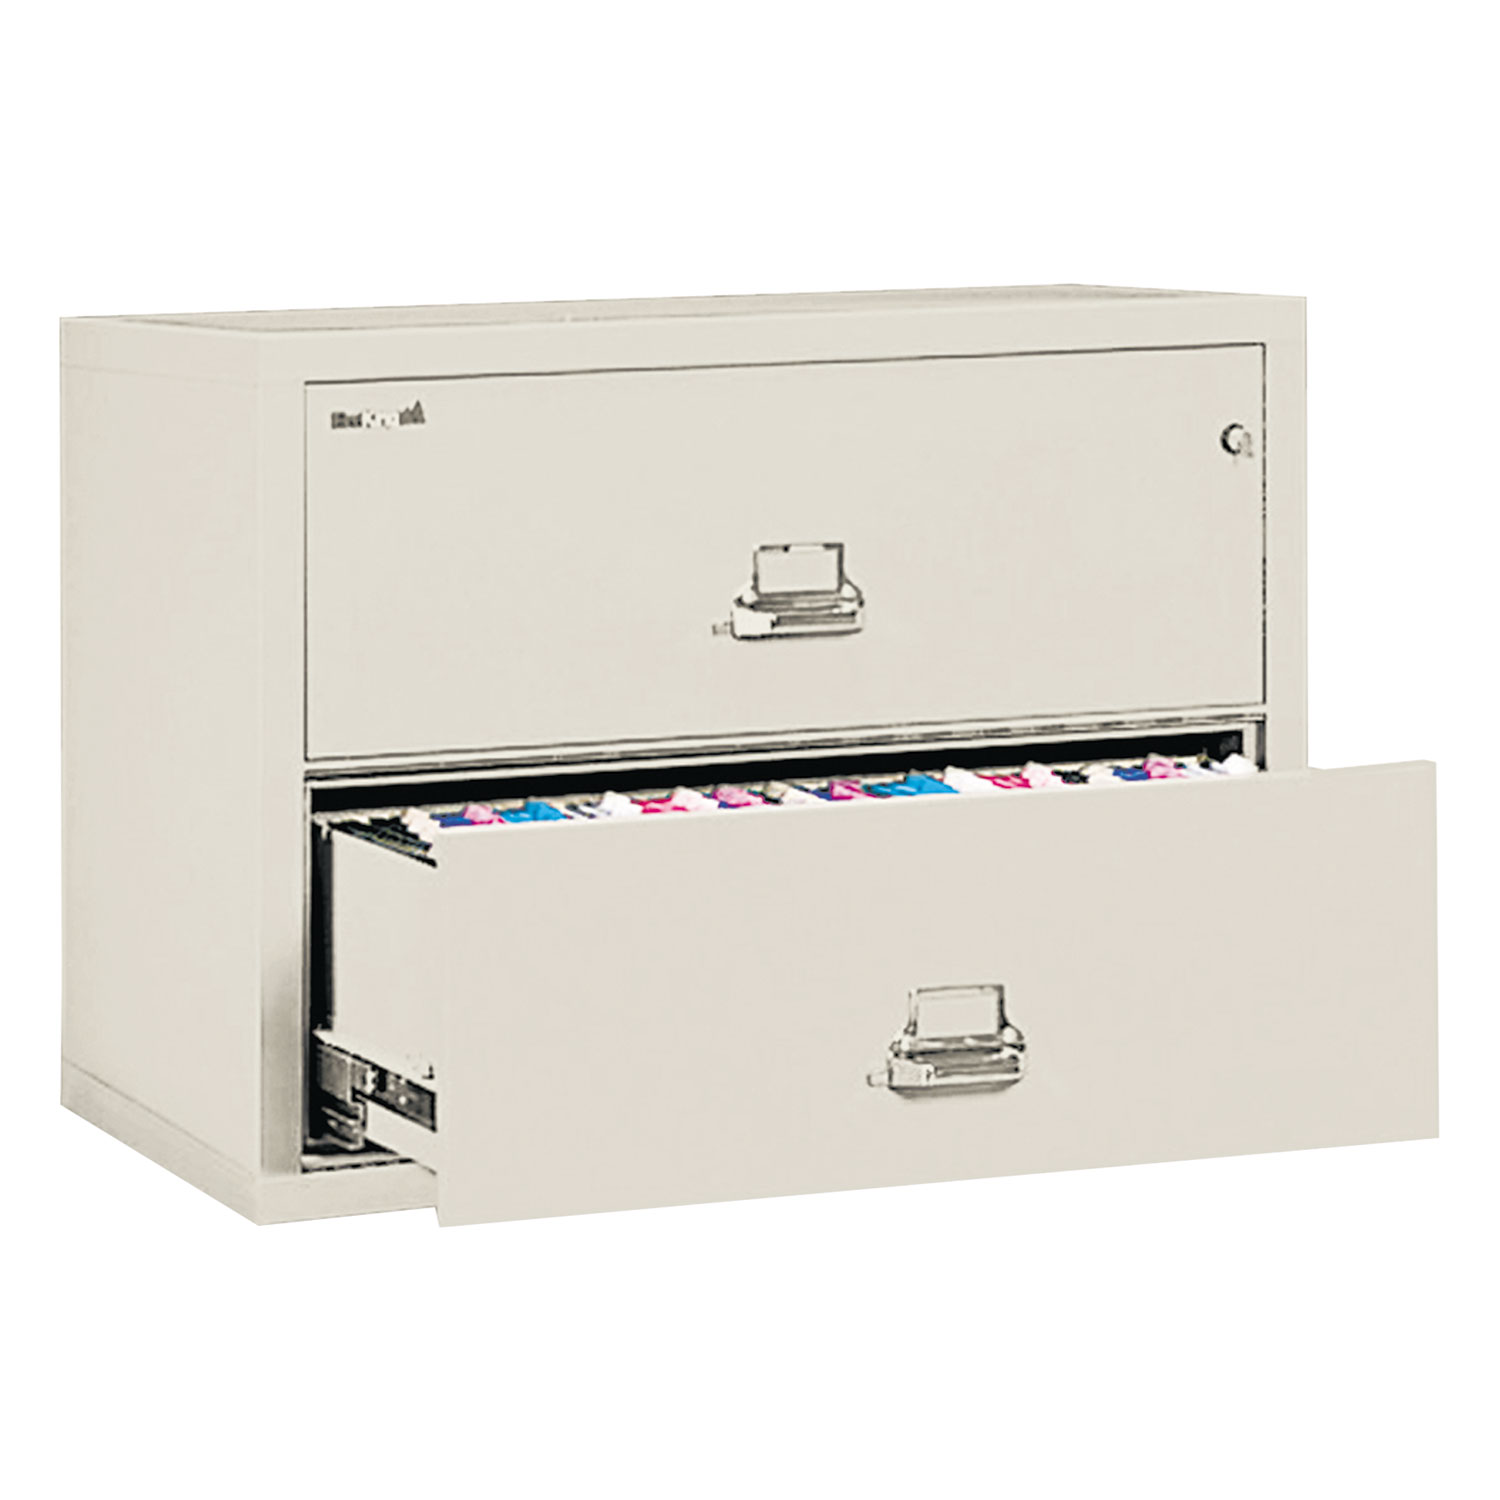 Two-Drawer Lateral File, 31-1/8w x 22-1/8d, UL Listed 350°, Ltr/Legal, Parchment